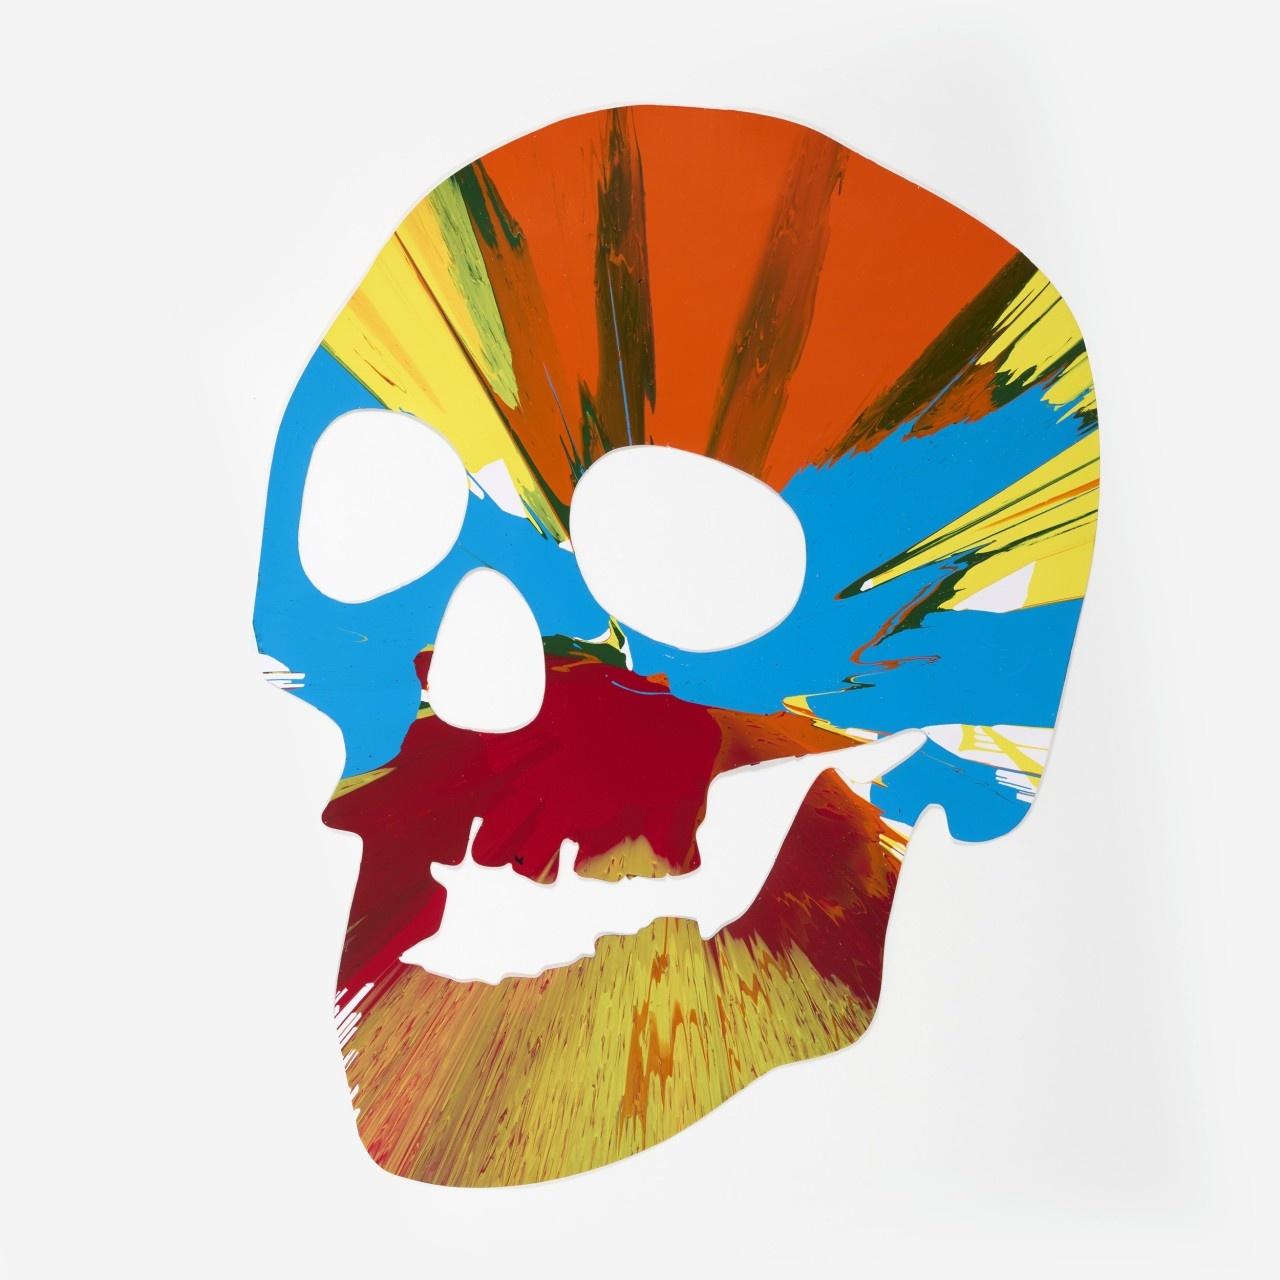 Damien Hirst, Skull Spin Painting, acrylique